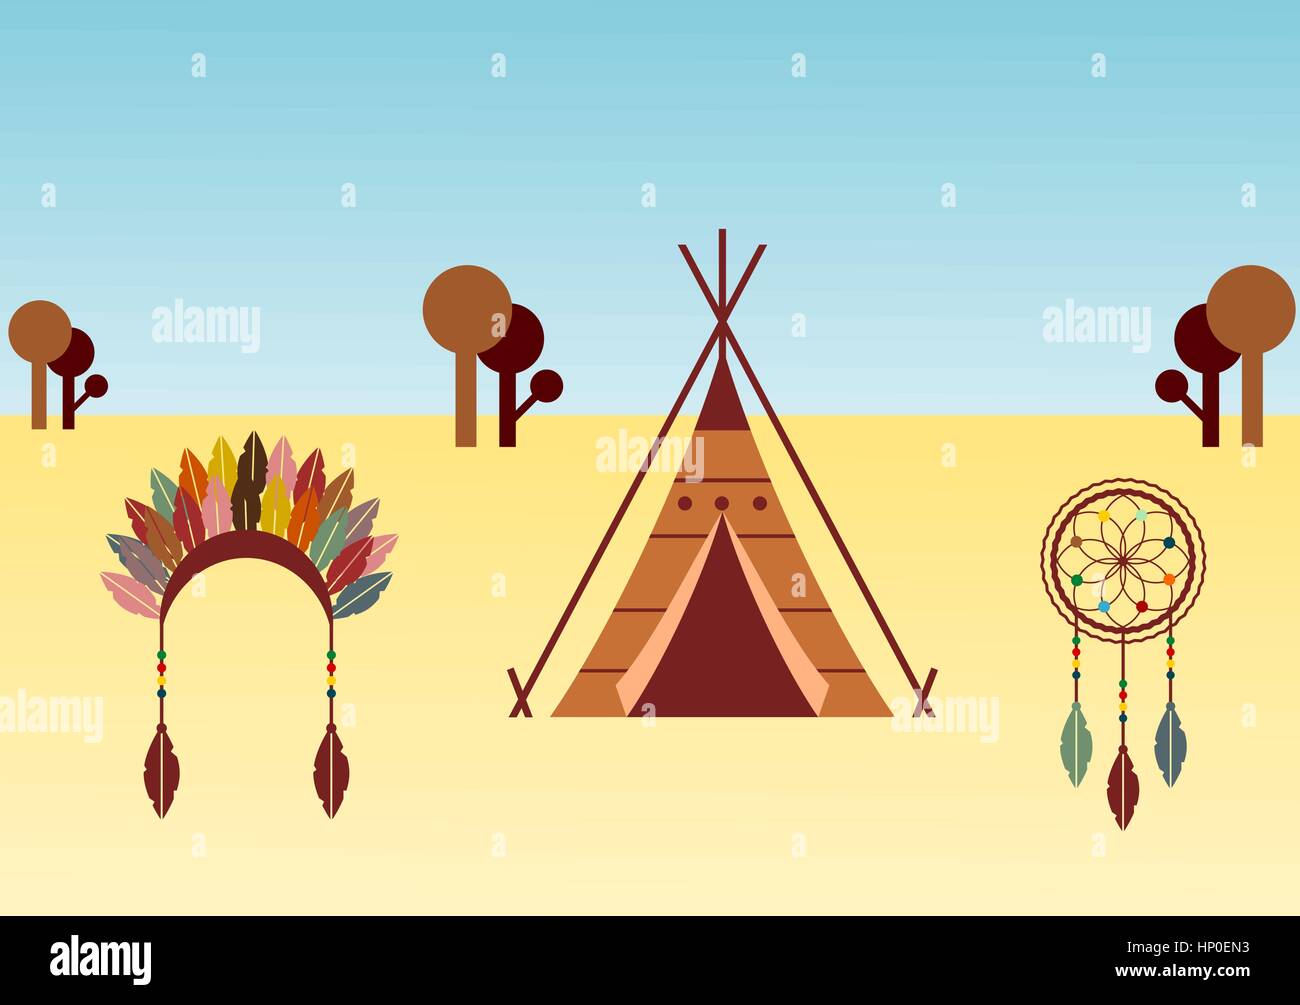 Native American themed illustration with wigwam, dream catcher and headdress. Native American culture concept. Artwork with ethnic design elements. Stock Vector